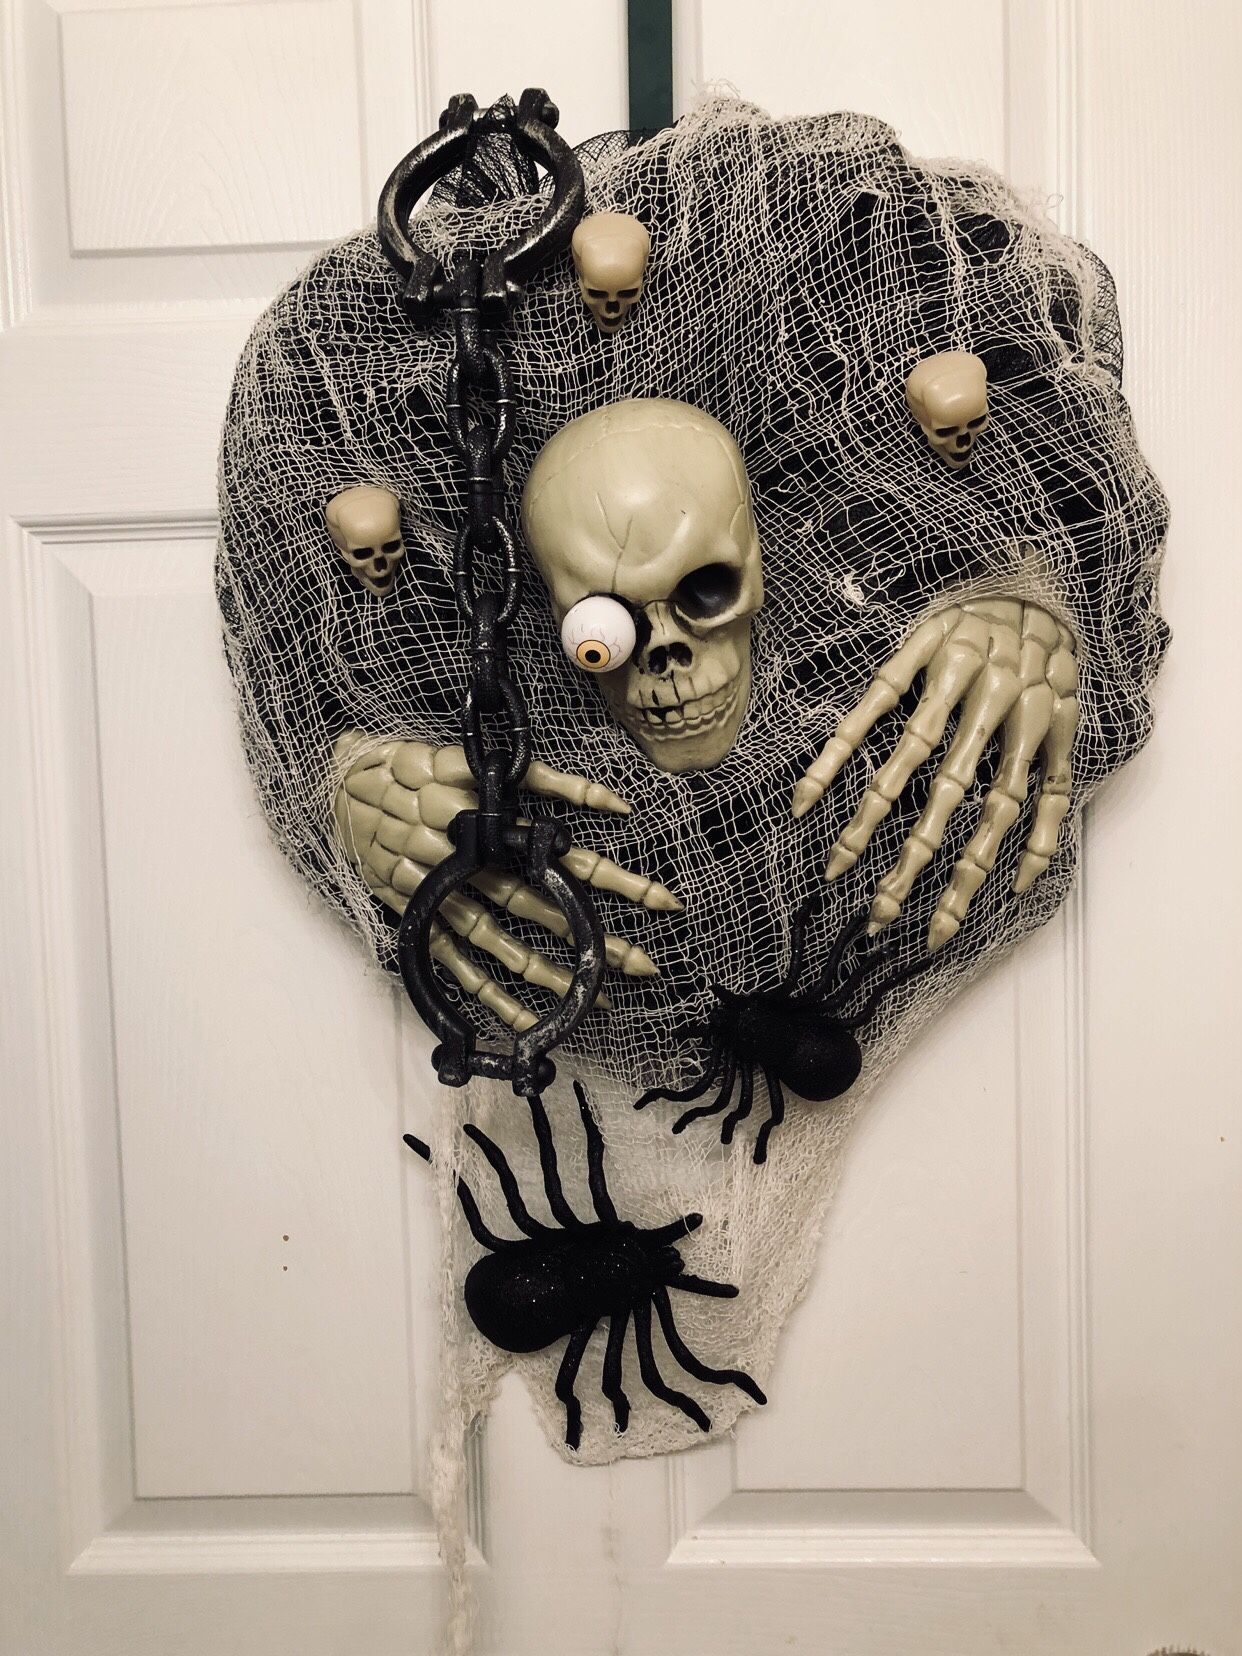 Scary Halloween decor for your home